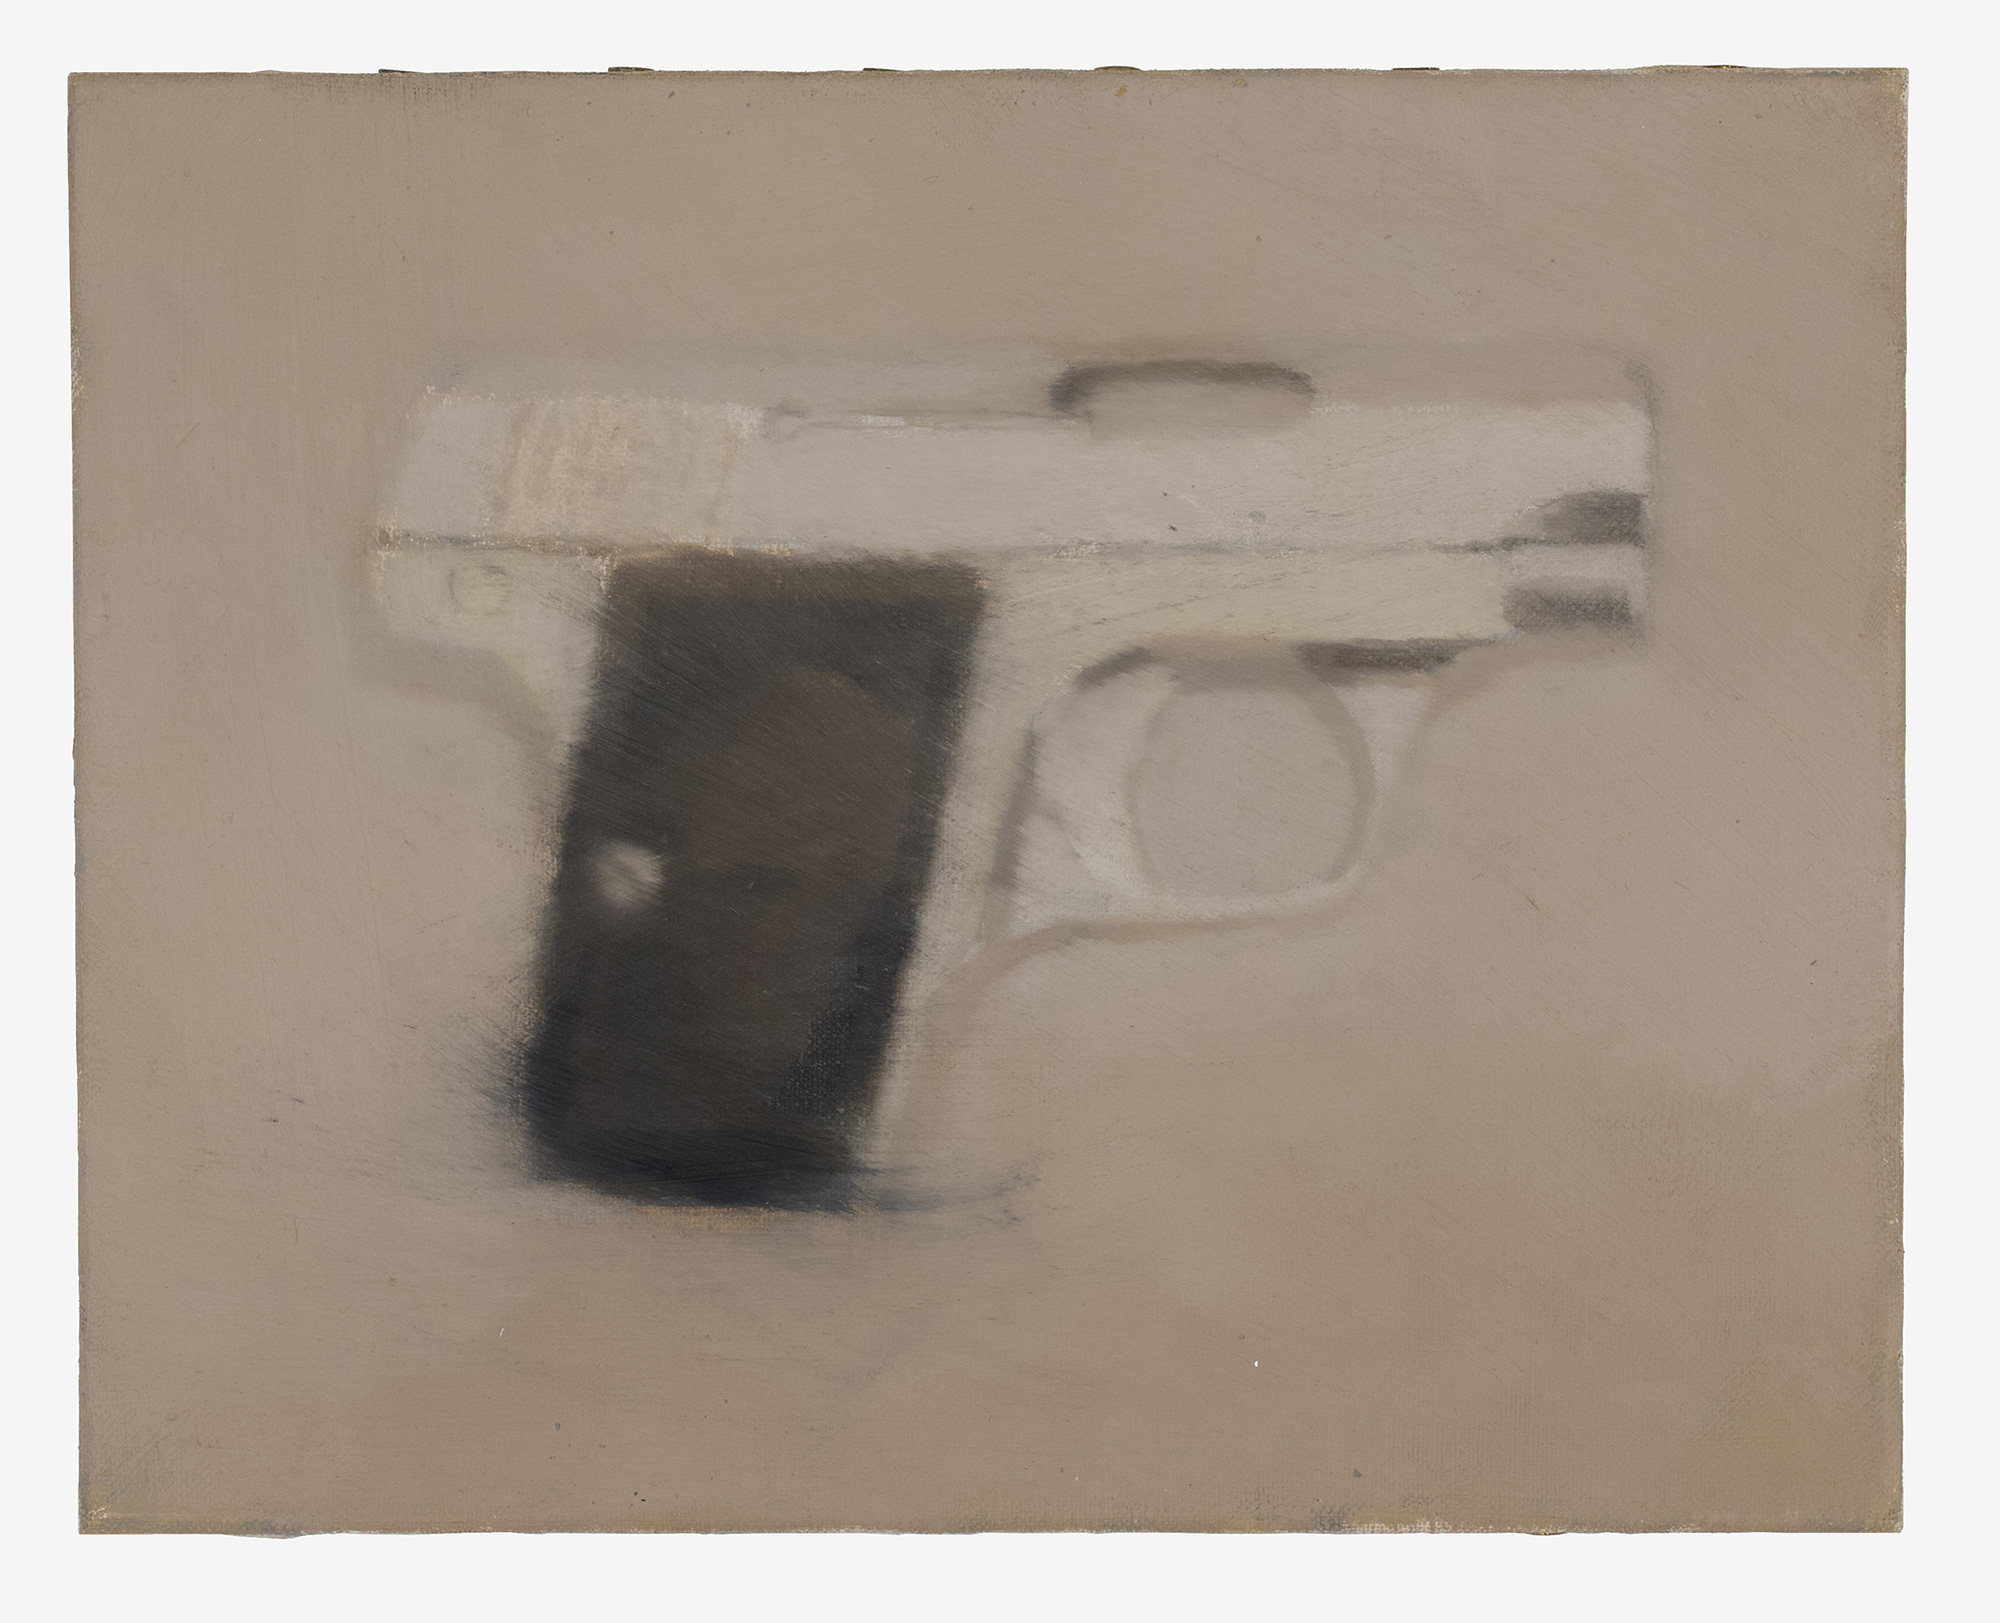 UNTITLED PISTOL - 2022 - SIZE: 10 X 8 INCHES - OIL ON LINEN